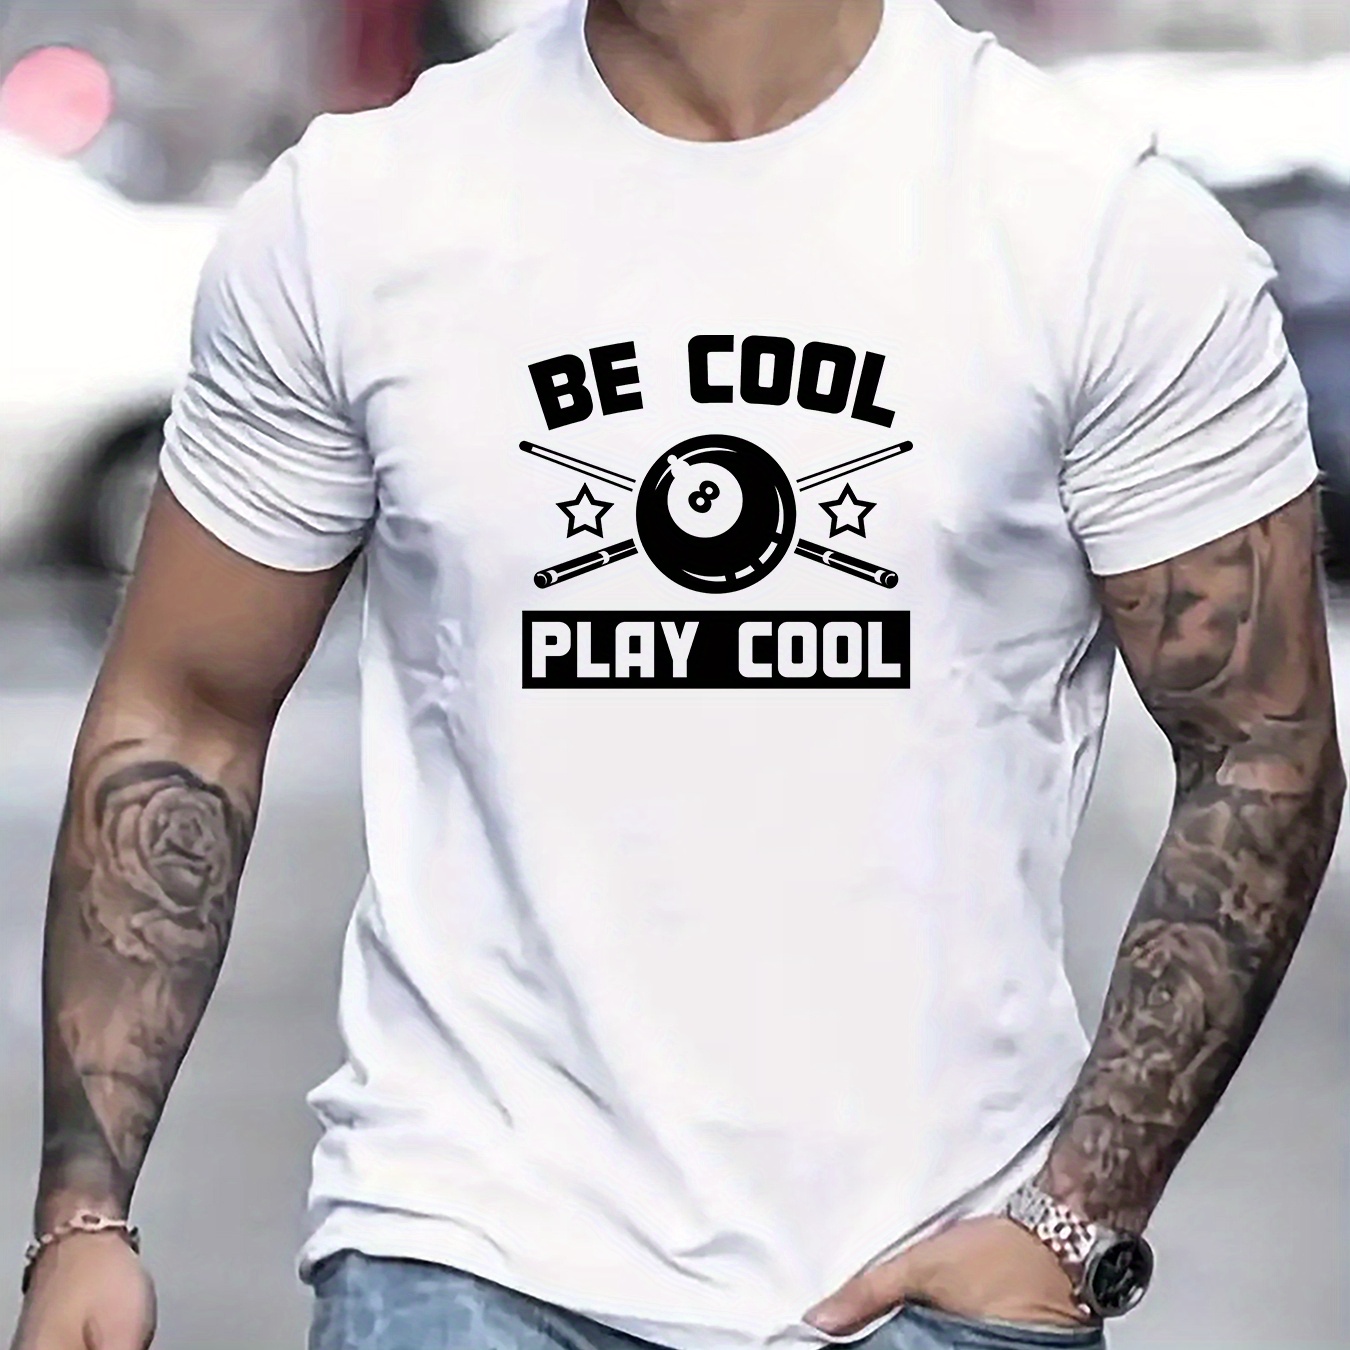 

Be Coll Paly Cool & Billiard Ball And Cue Pattern Print Men's Casual Round Neck Short T-sleeves, Quick-drying Comfy Casual Summer T-shirt For Daily Wear Work Out And Vacation Resorts